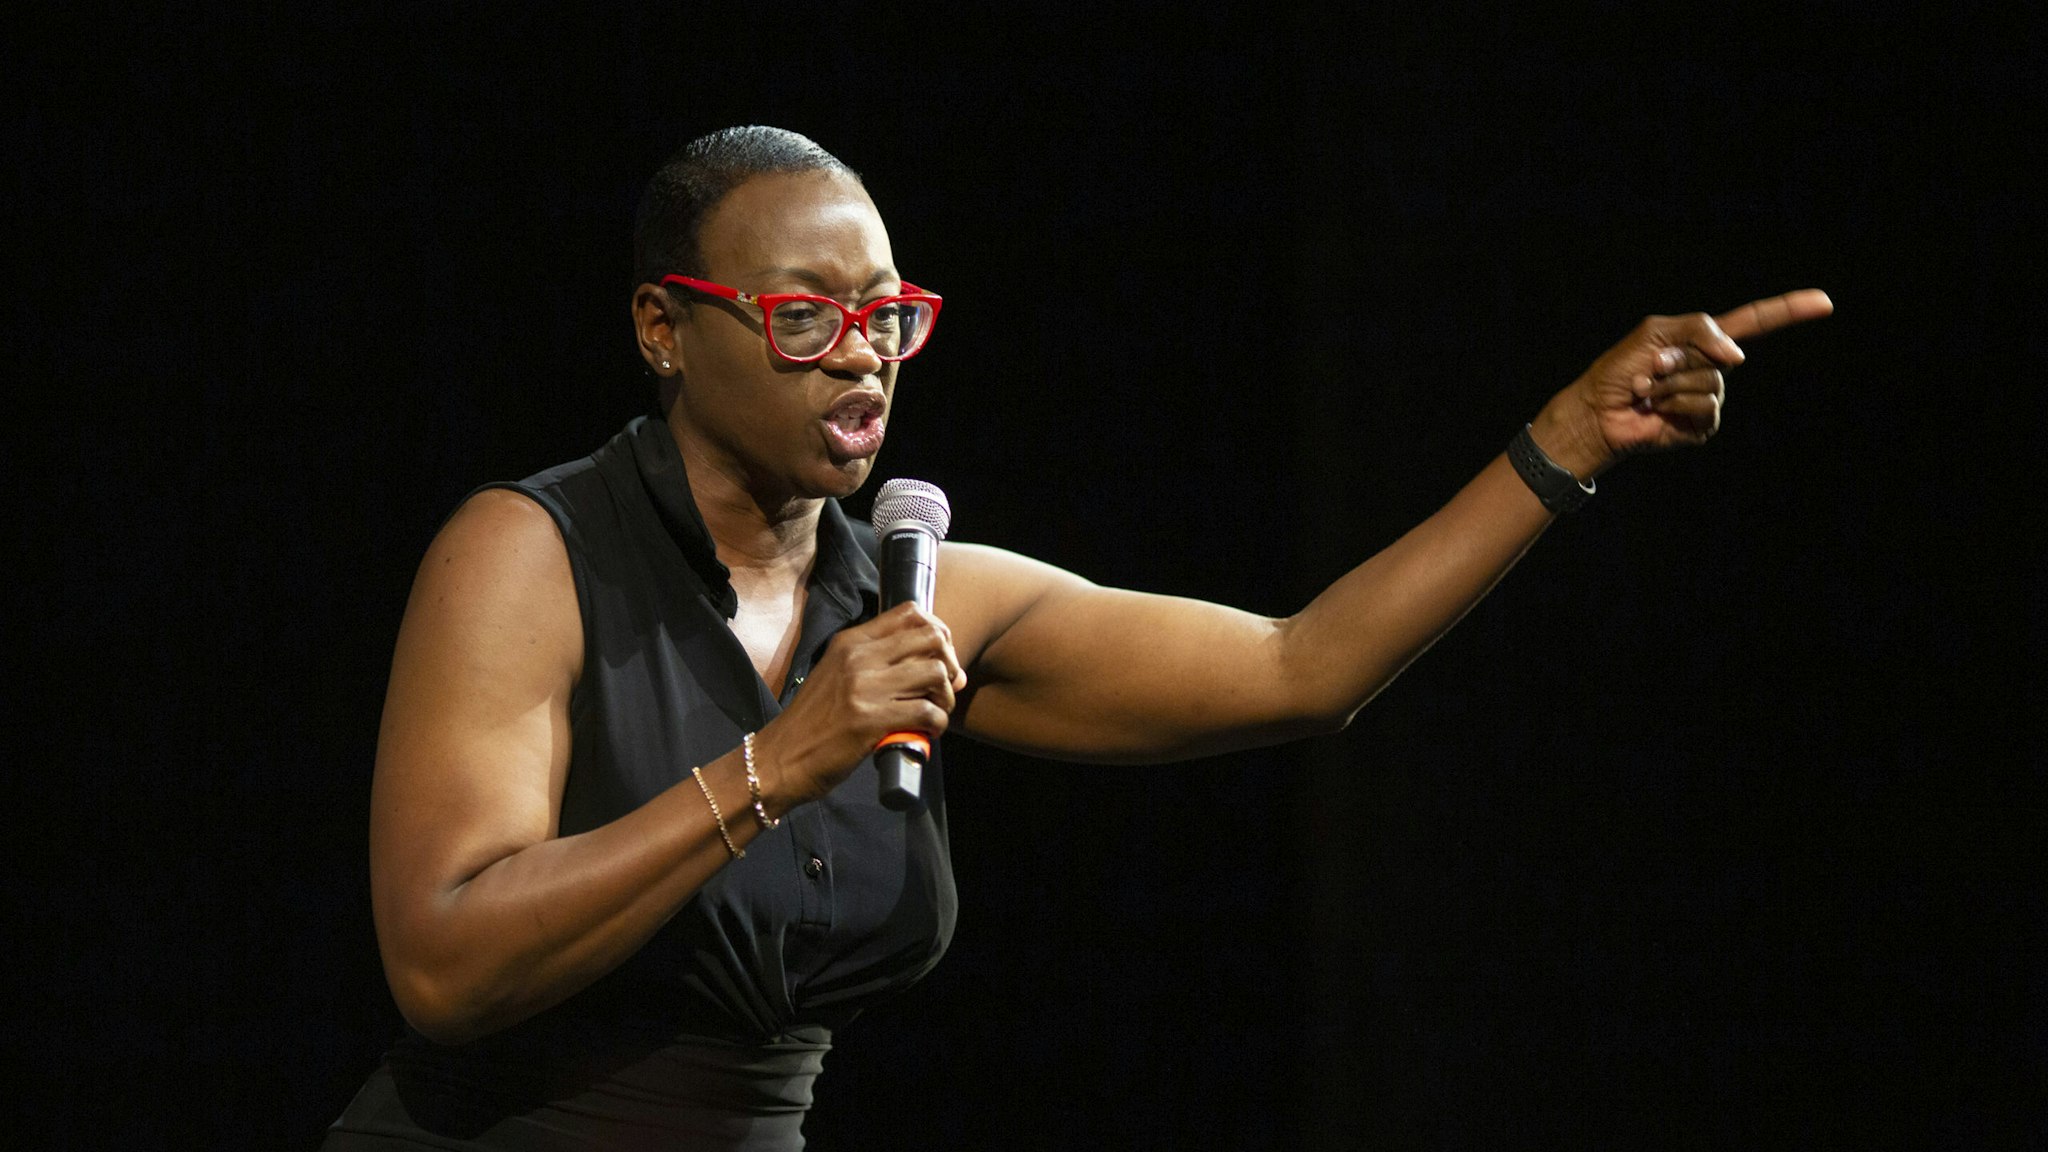 LOS ANGELES, CA - JULY 25: Former Ohio state Sen. Nina Turner speaks before Democratic presidential hopeful Sen. Bernie Sanders takes the stage for a town hall discussion about health care on July 25, 2019 in Los Angeles, California. Sanders is on the first of a two-day visit to Los Angeles.